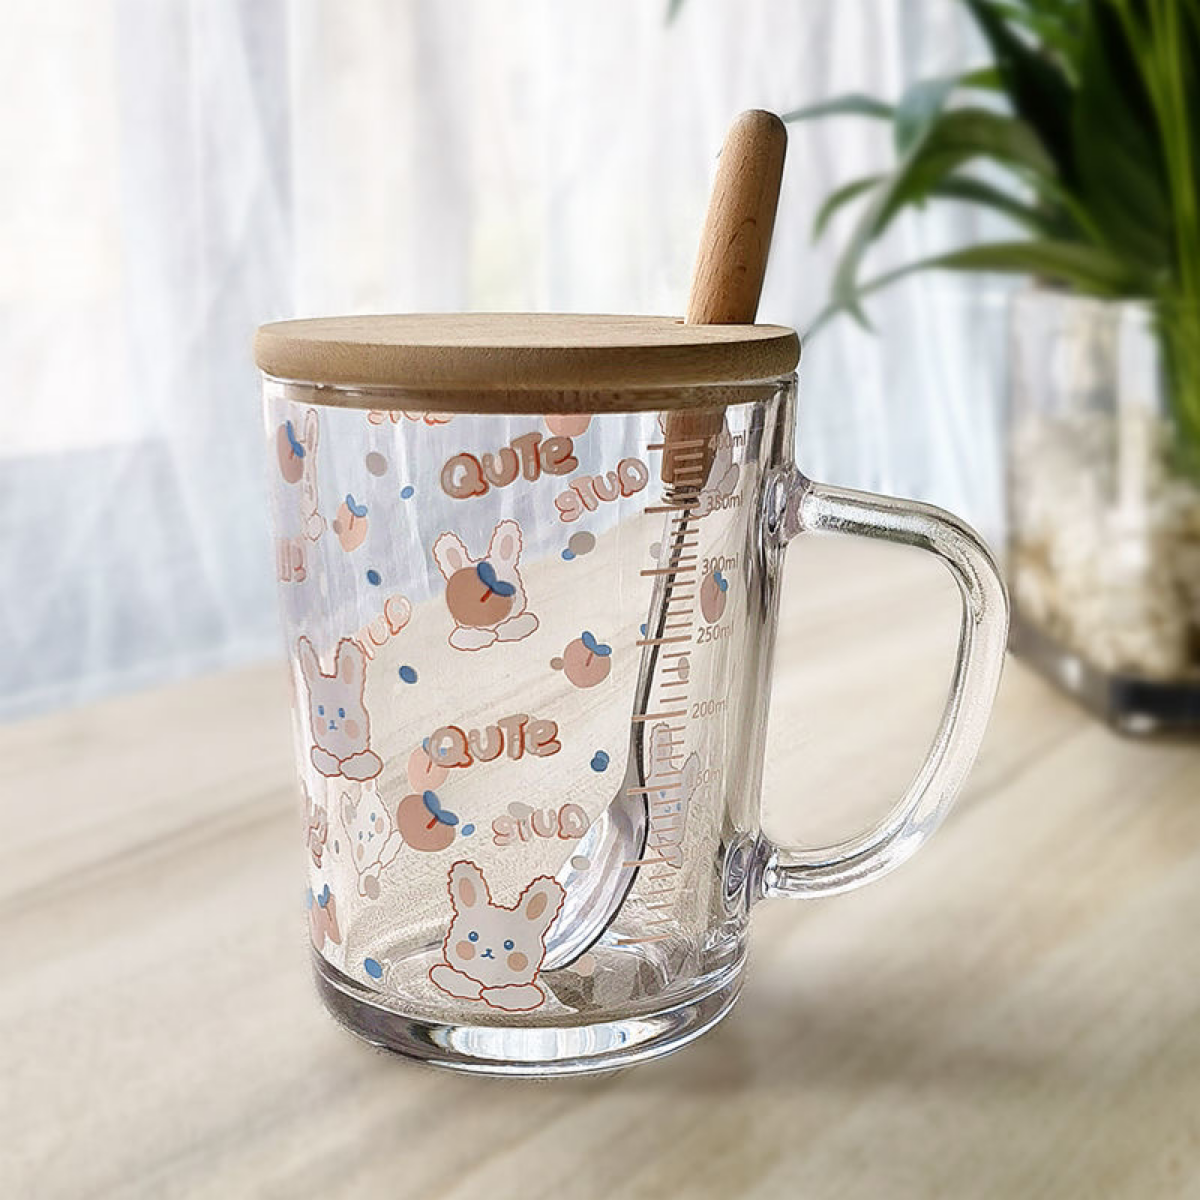 Cute bunny glass with spoon